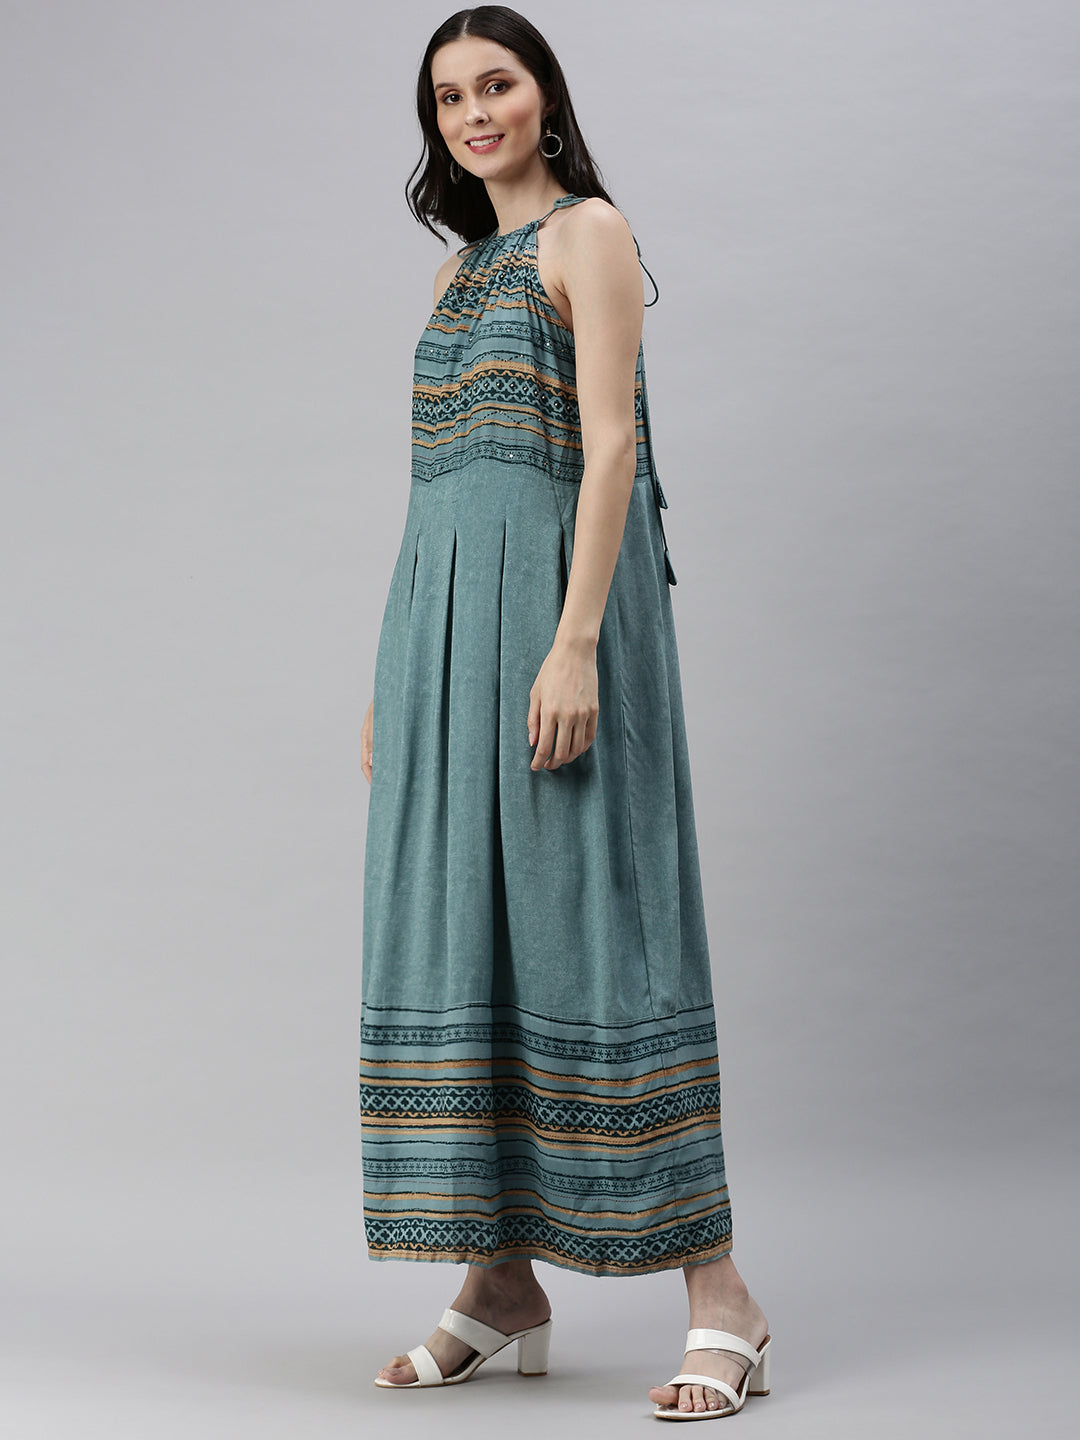 Women's Ethnic Motifs Blue Fit and Flare Dress